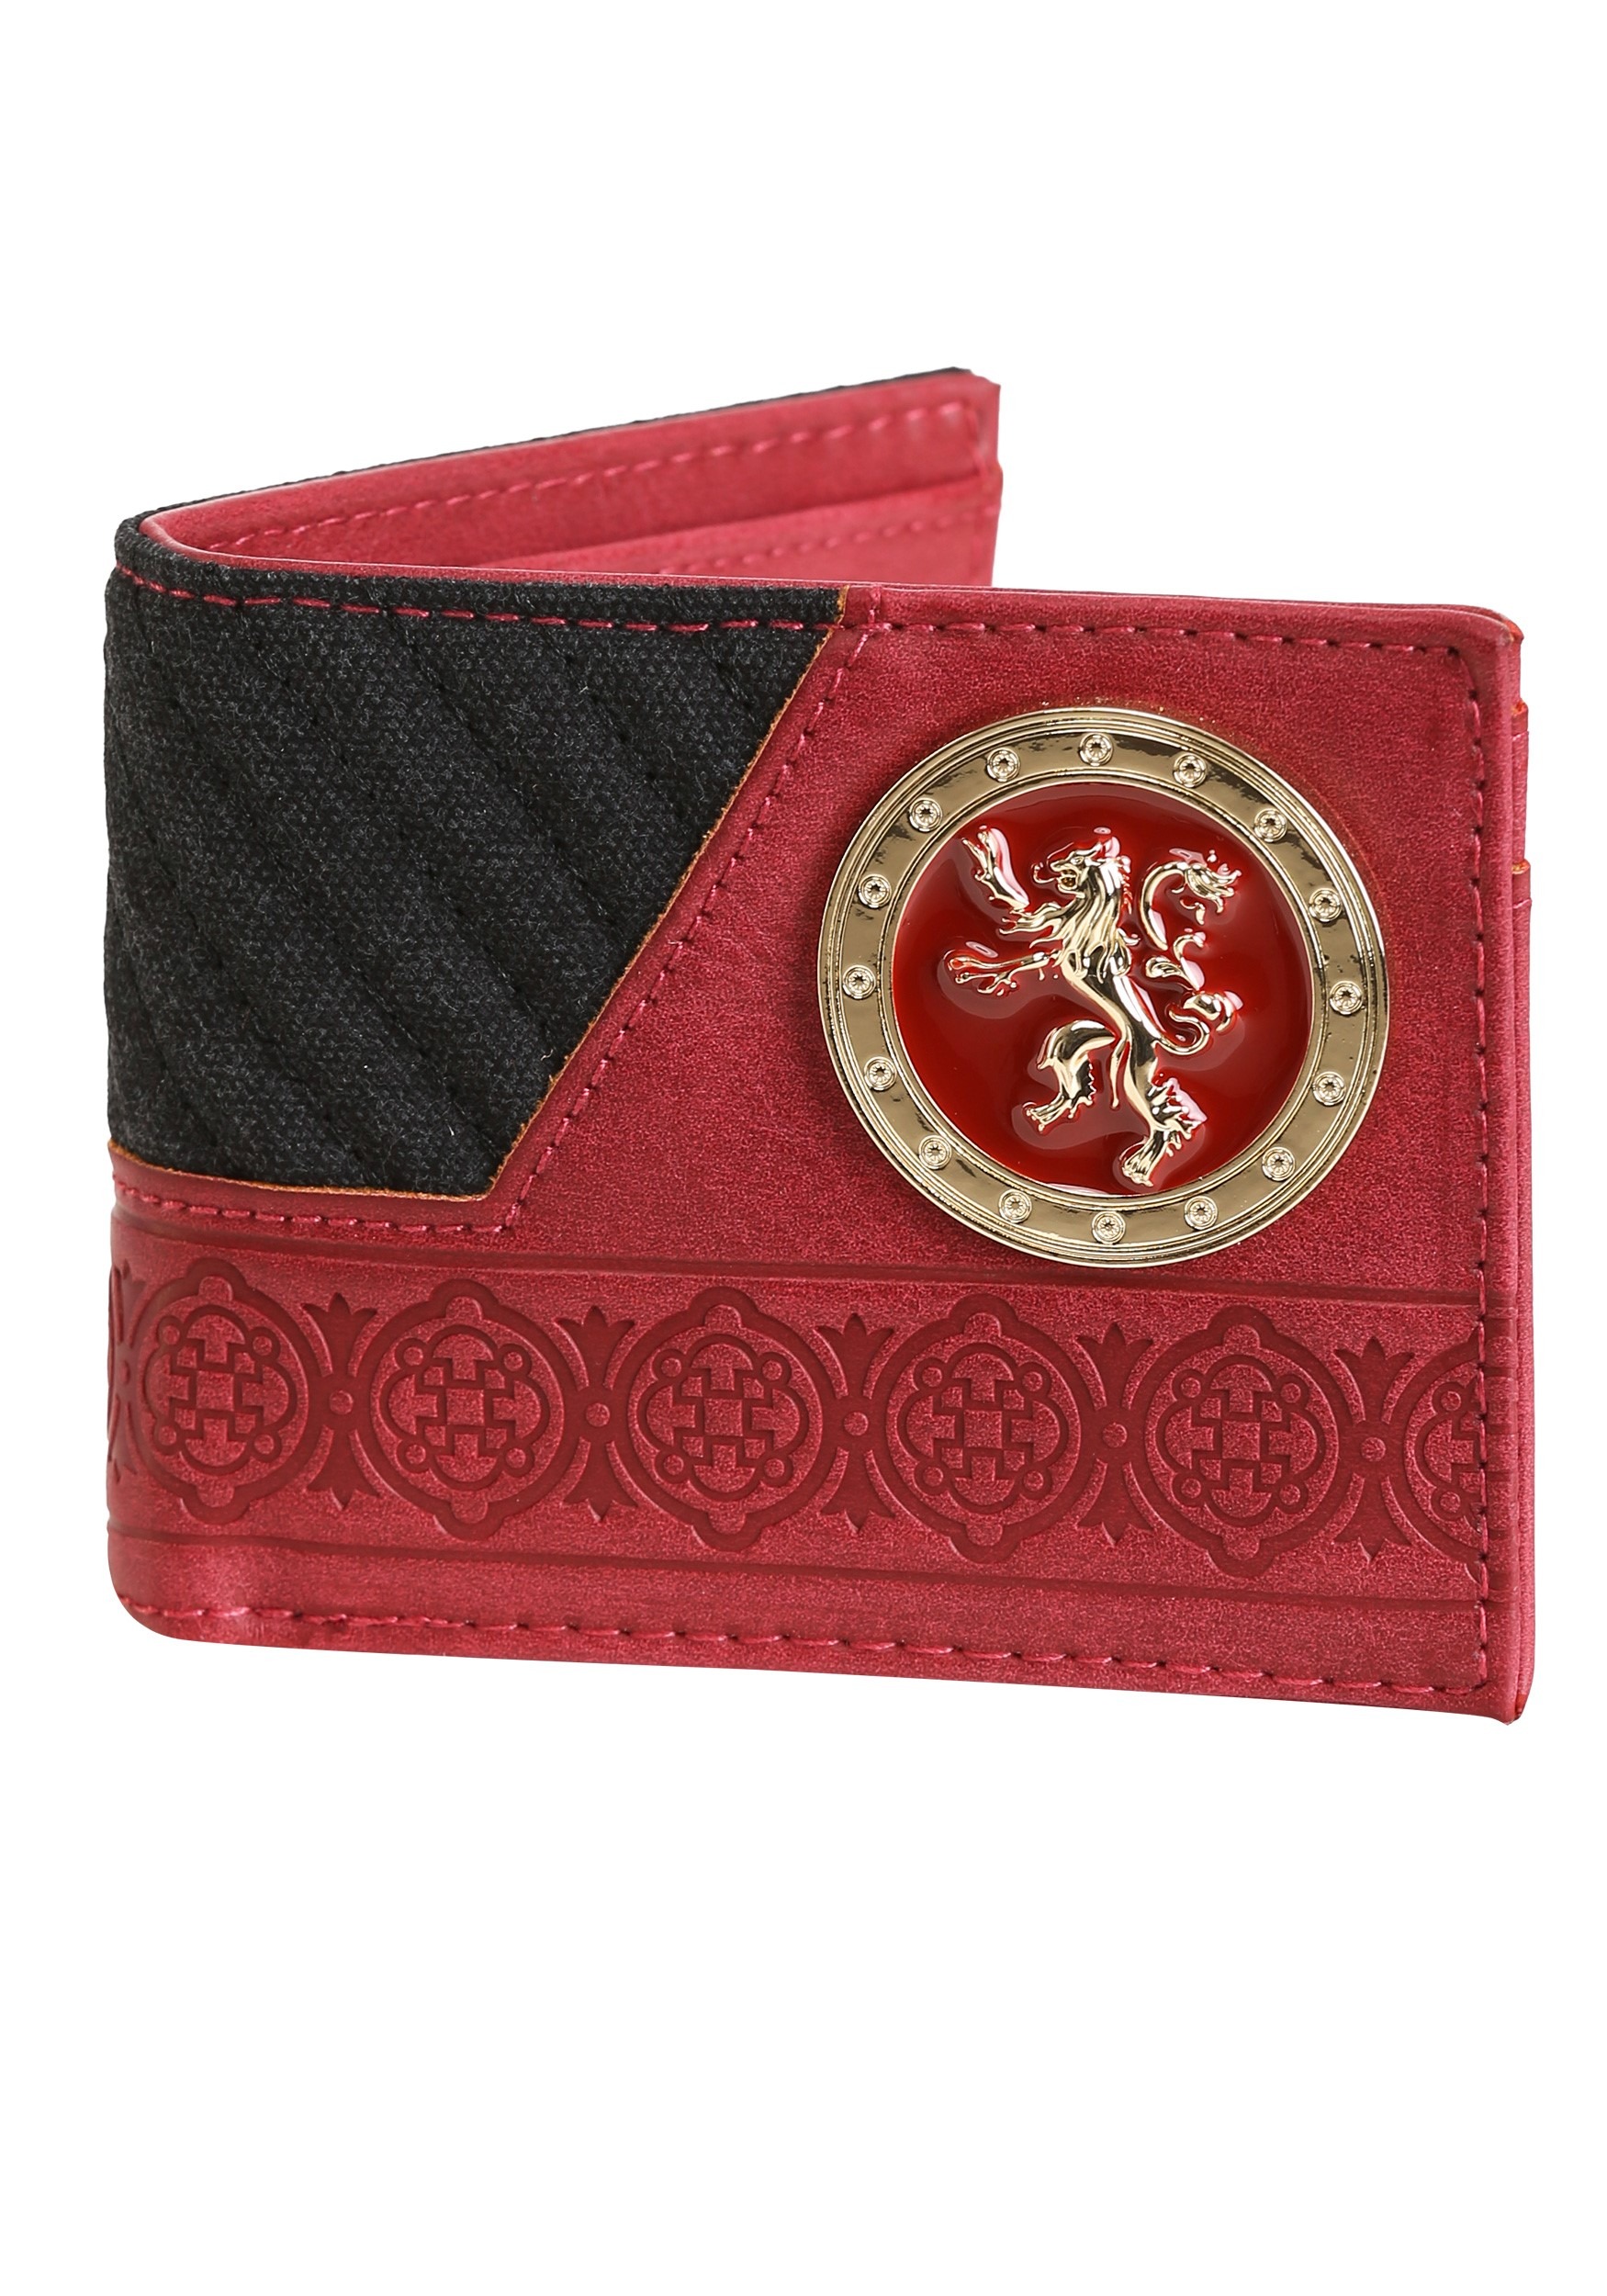 House Lannister Bi-Fold Wallet from Game of Thrones